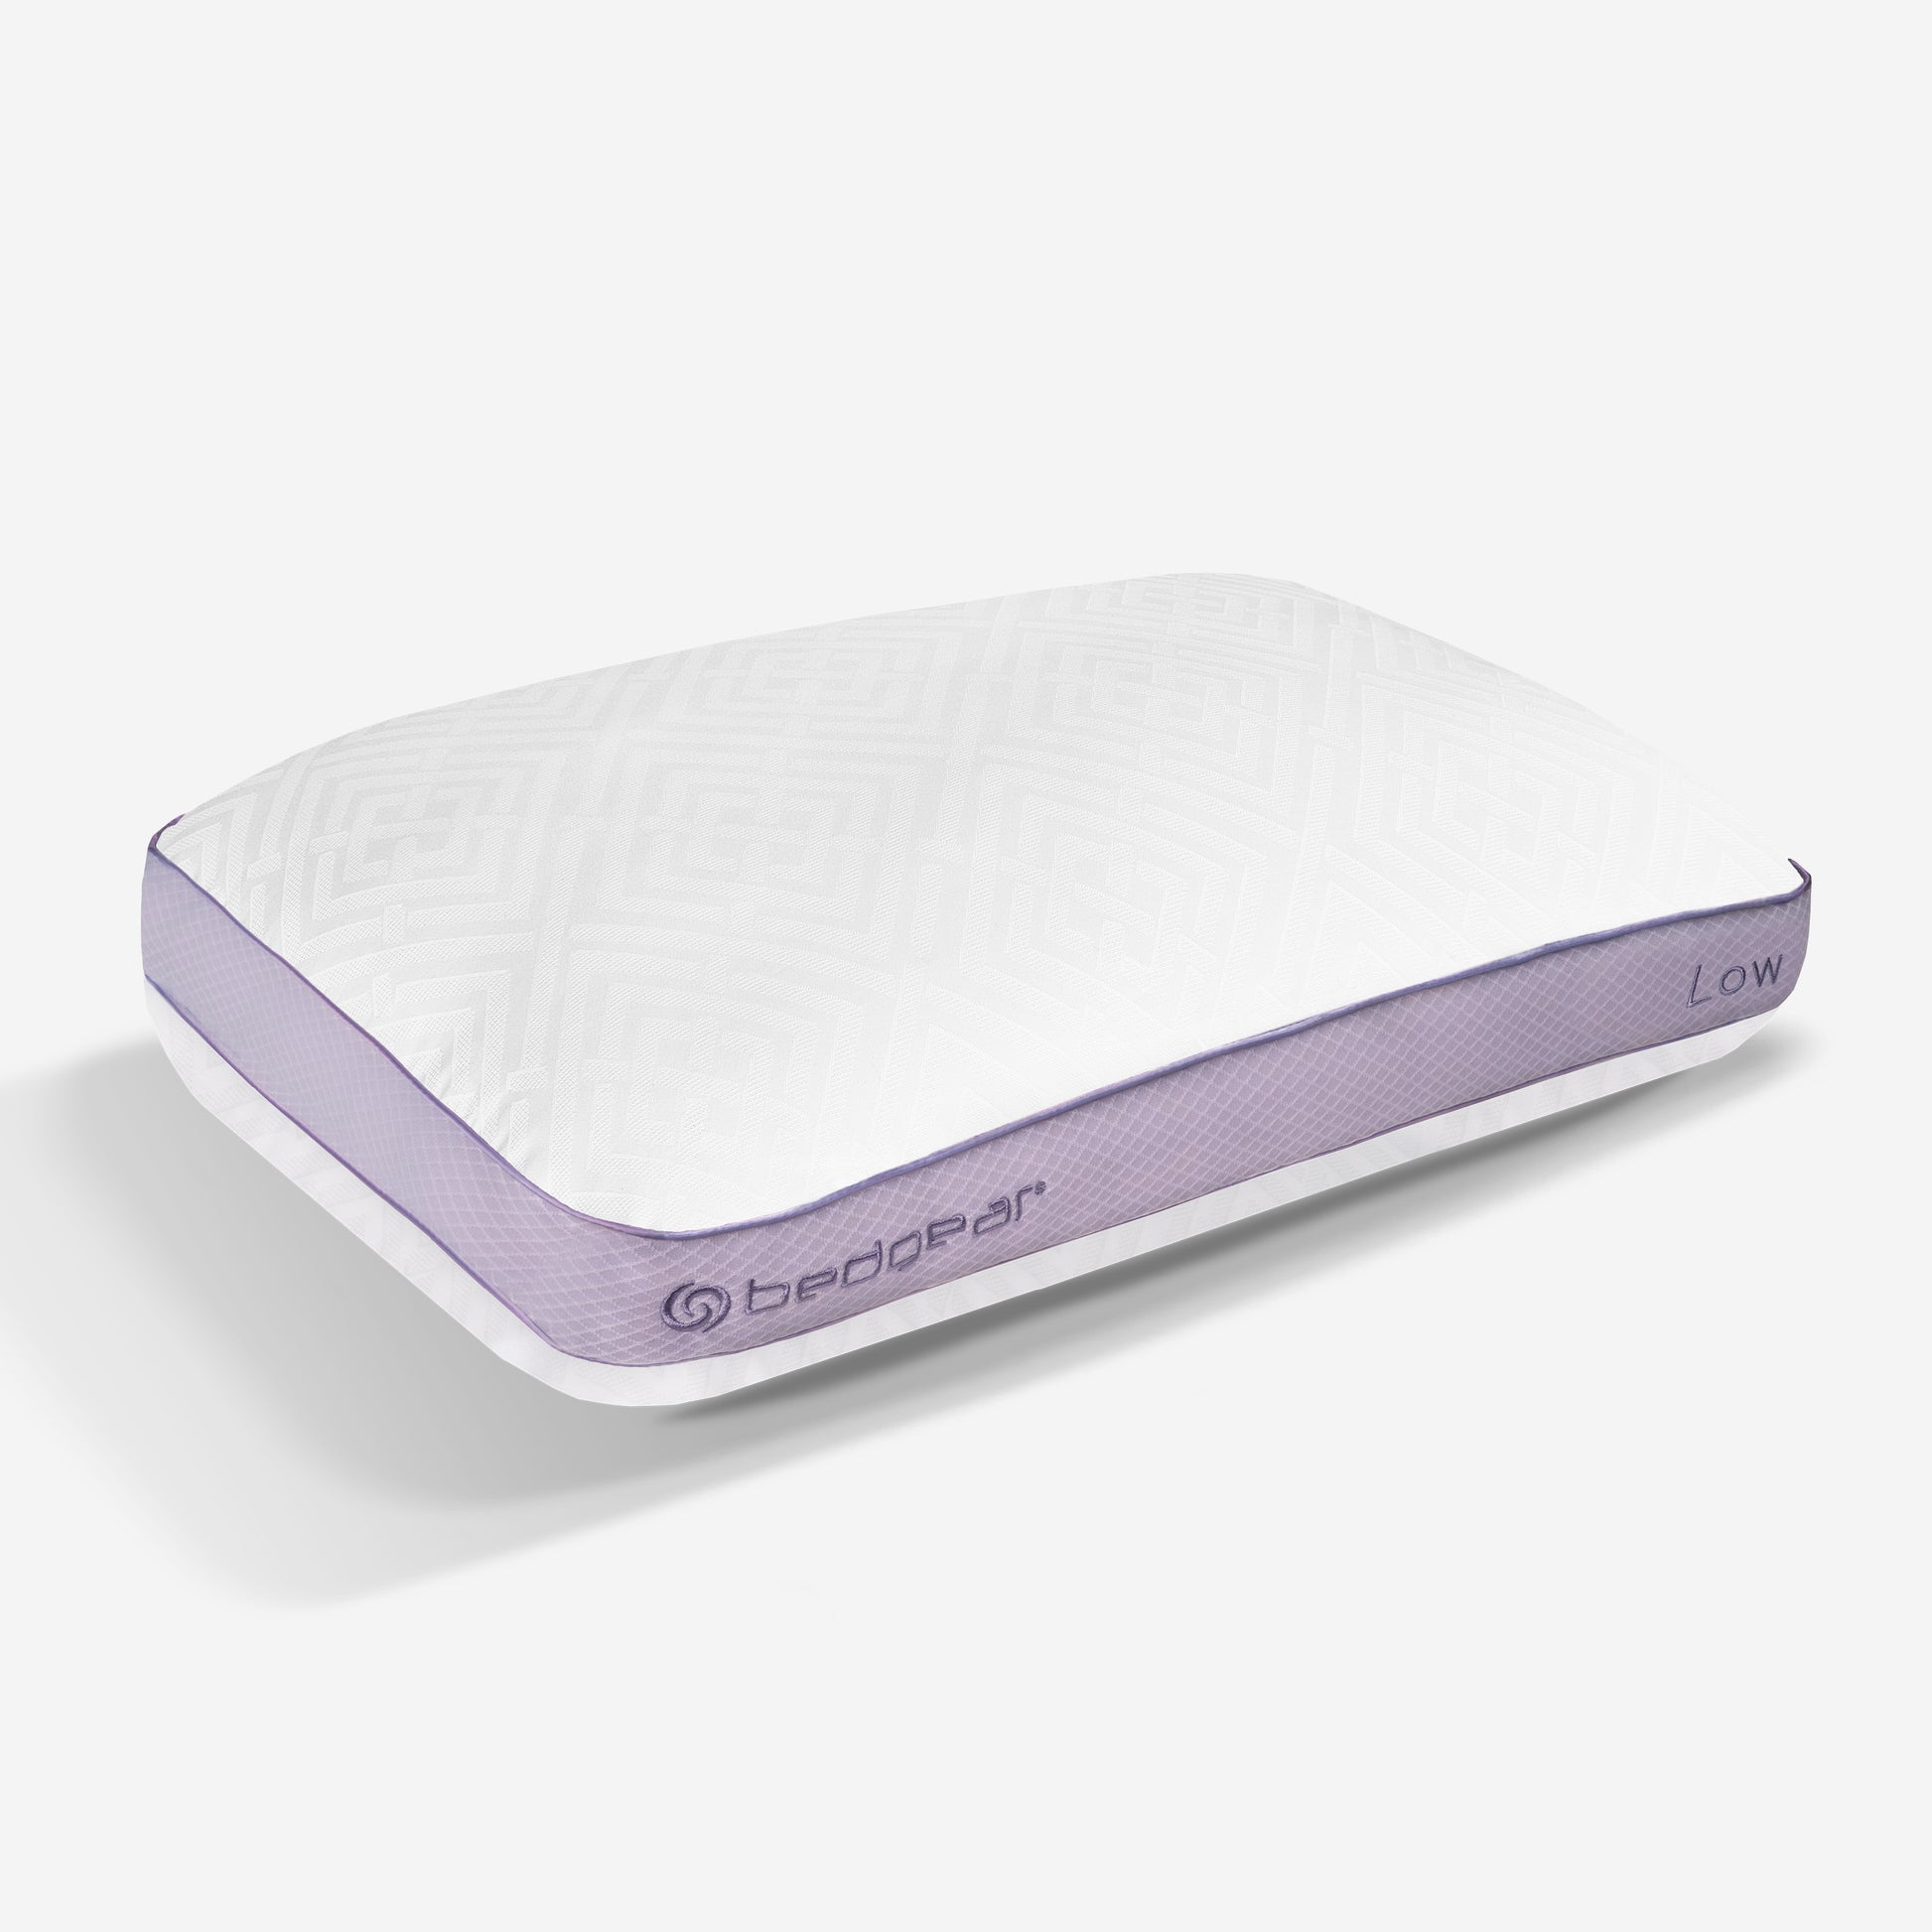 Bedgear High-Low Performance Pillow - Image 1